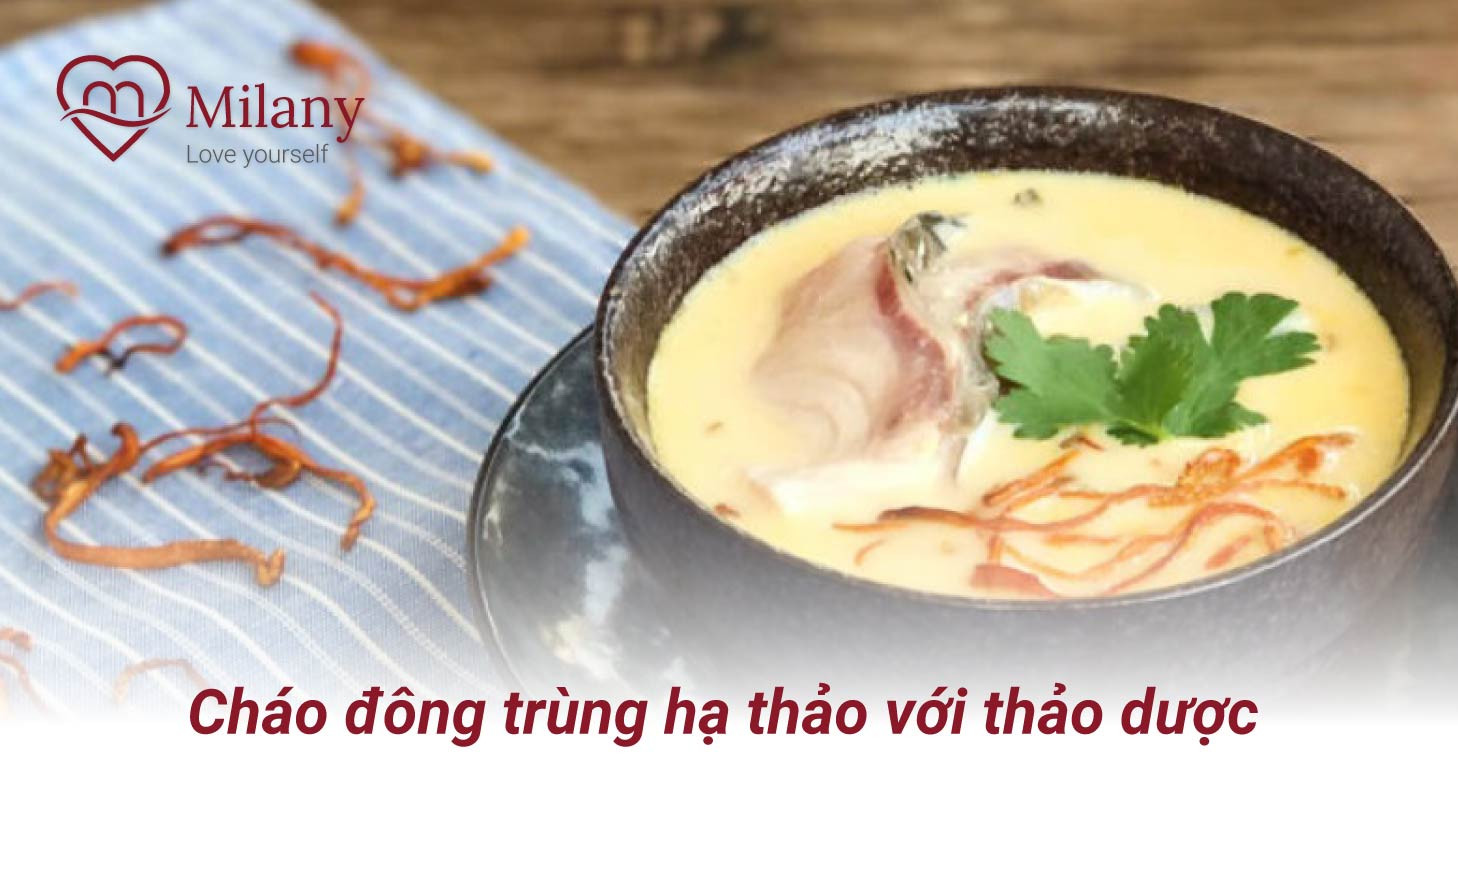 chao-dong-trung-ha-thao-voi-thao-duoc